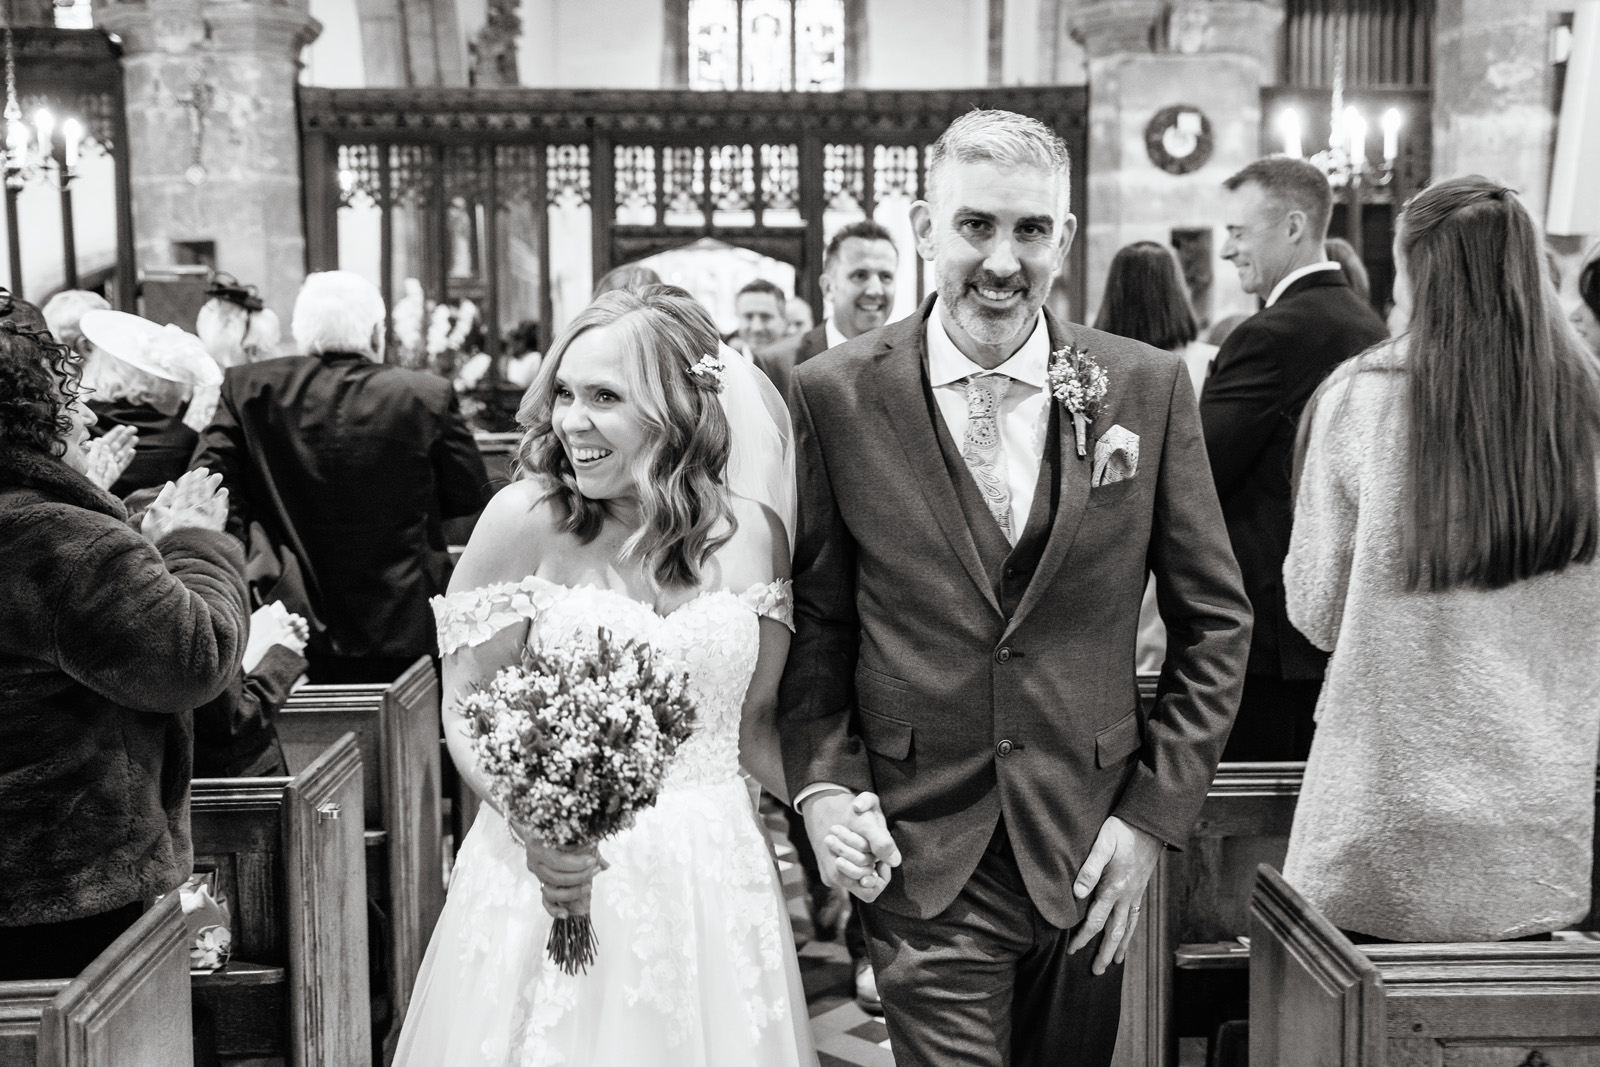 Winter Wedding Photography at Coombe Lodge